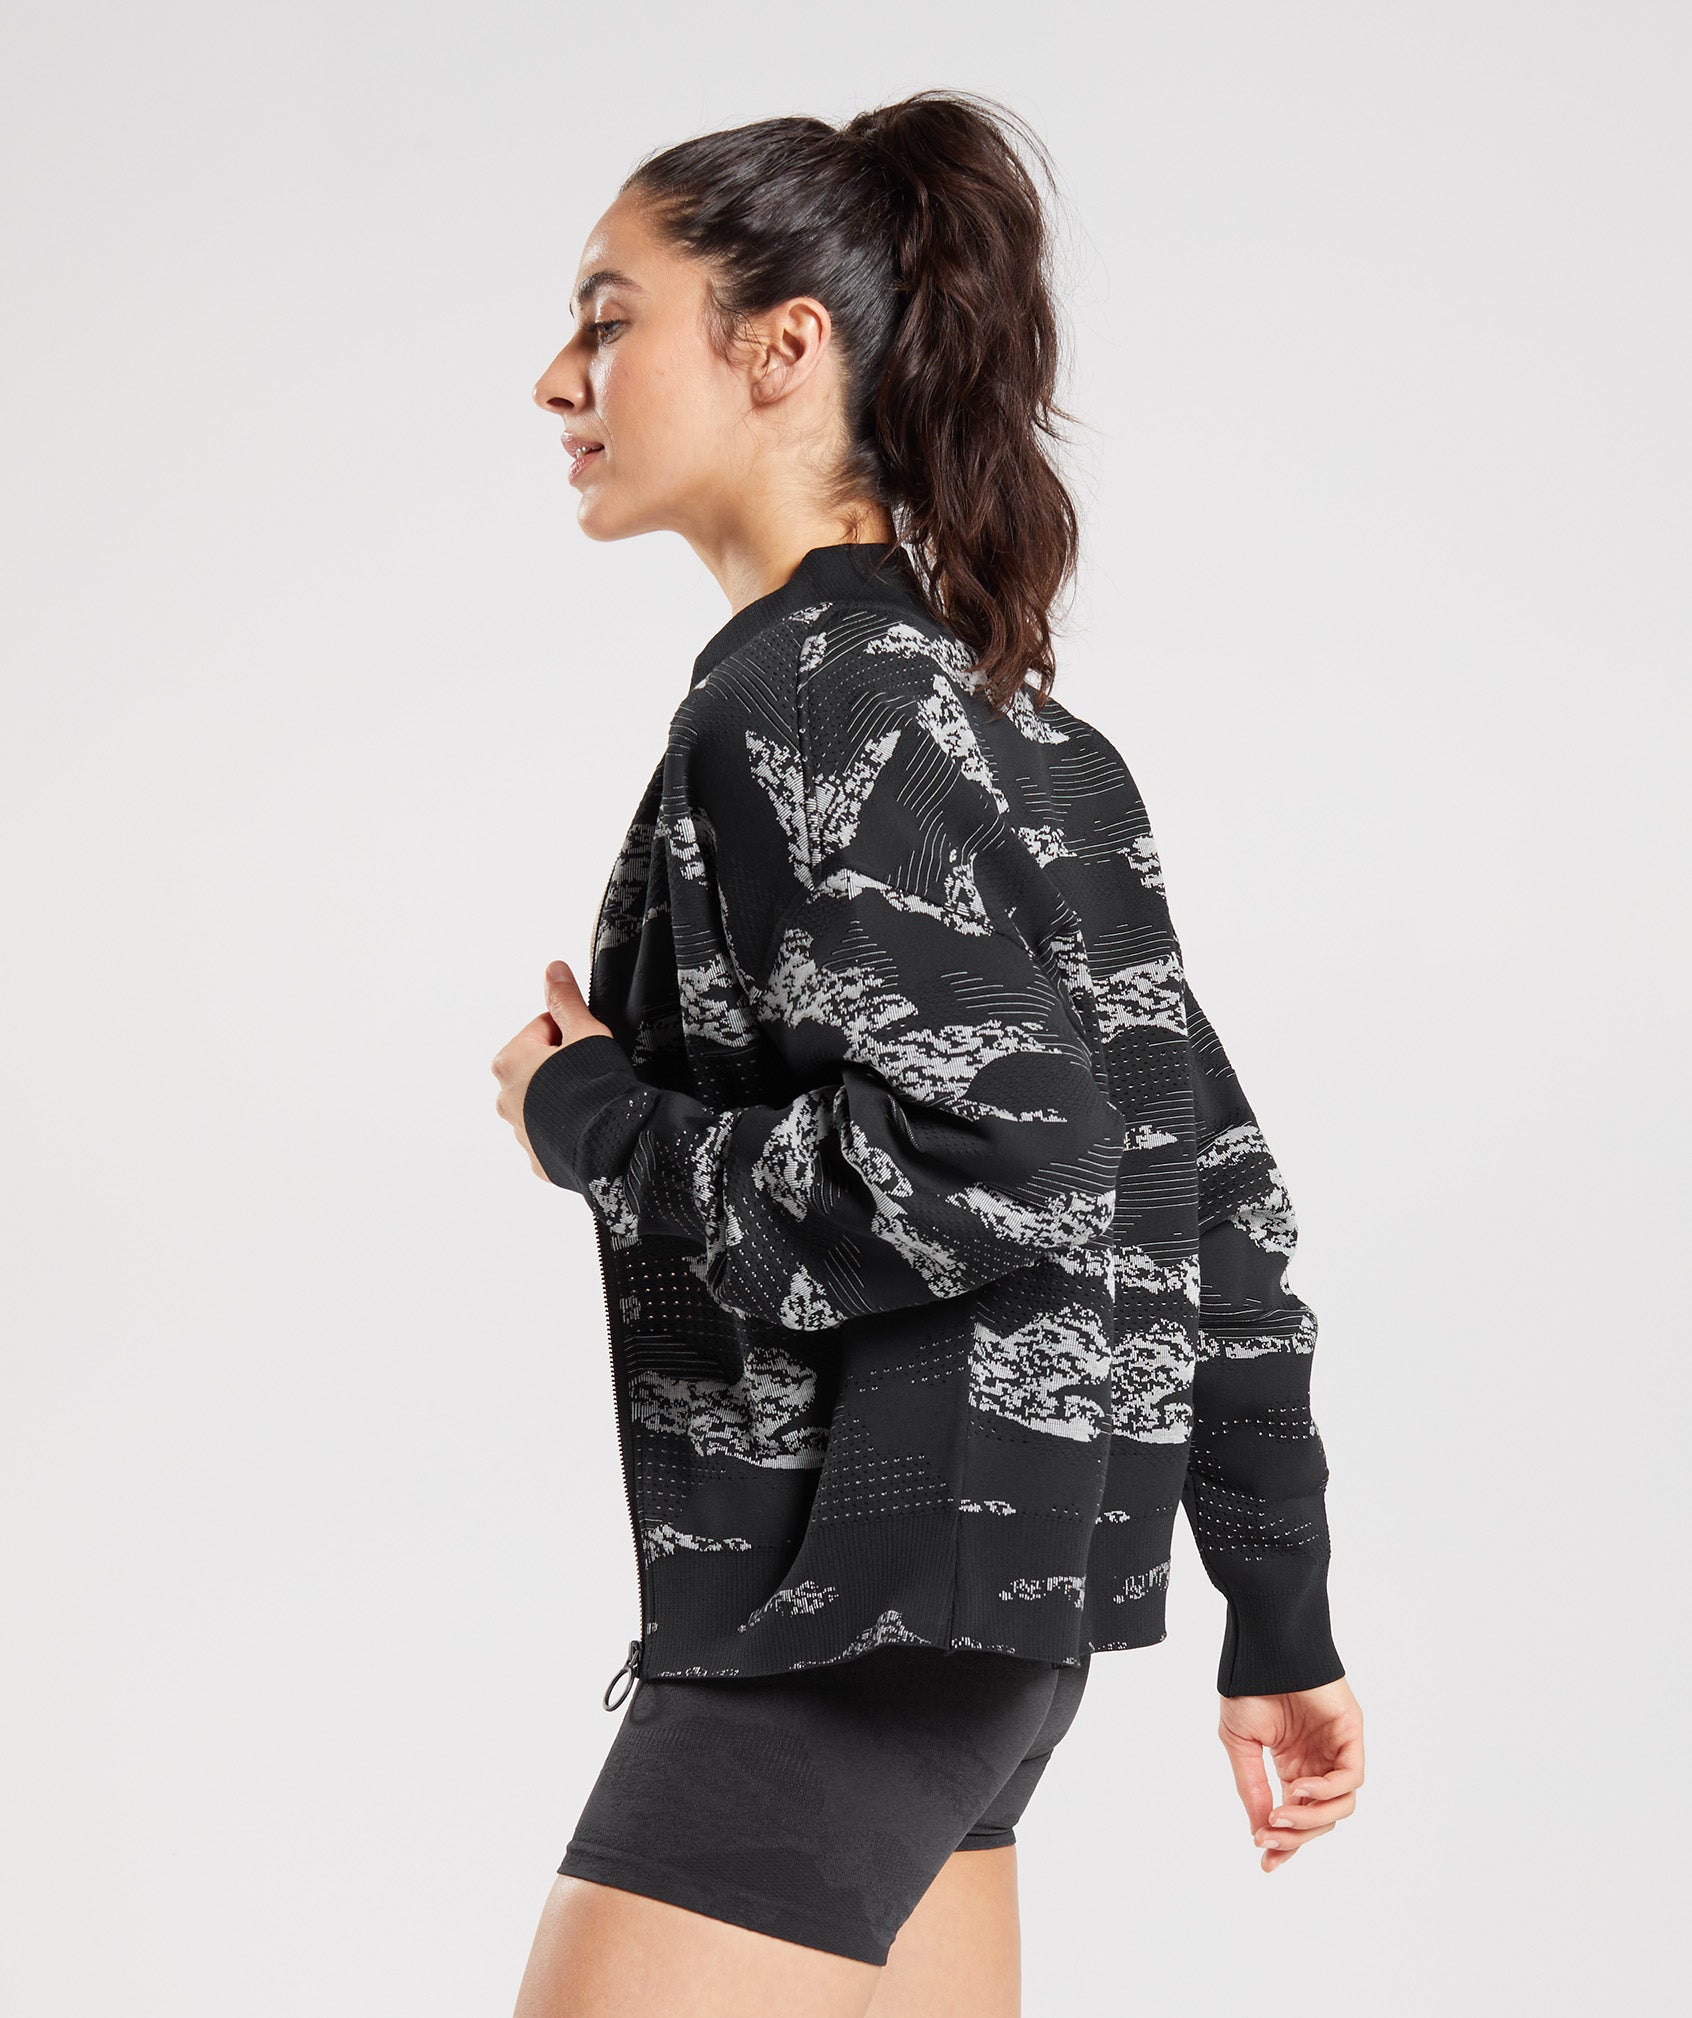 Adapt Camo Seamless Track Jacket in Black/Light Grey - view 4